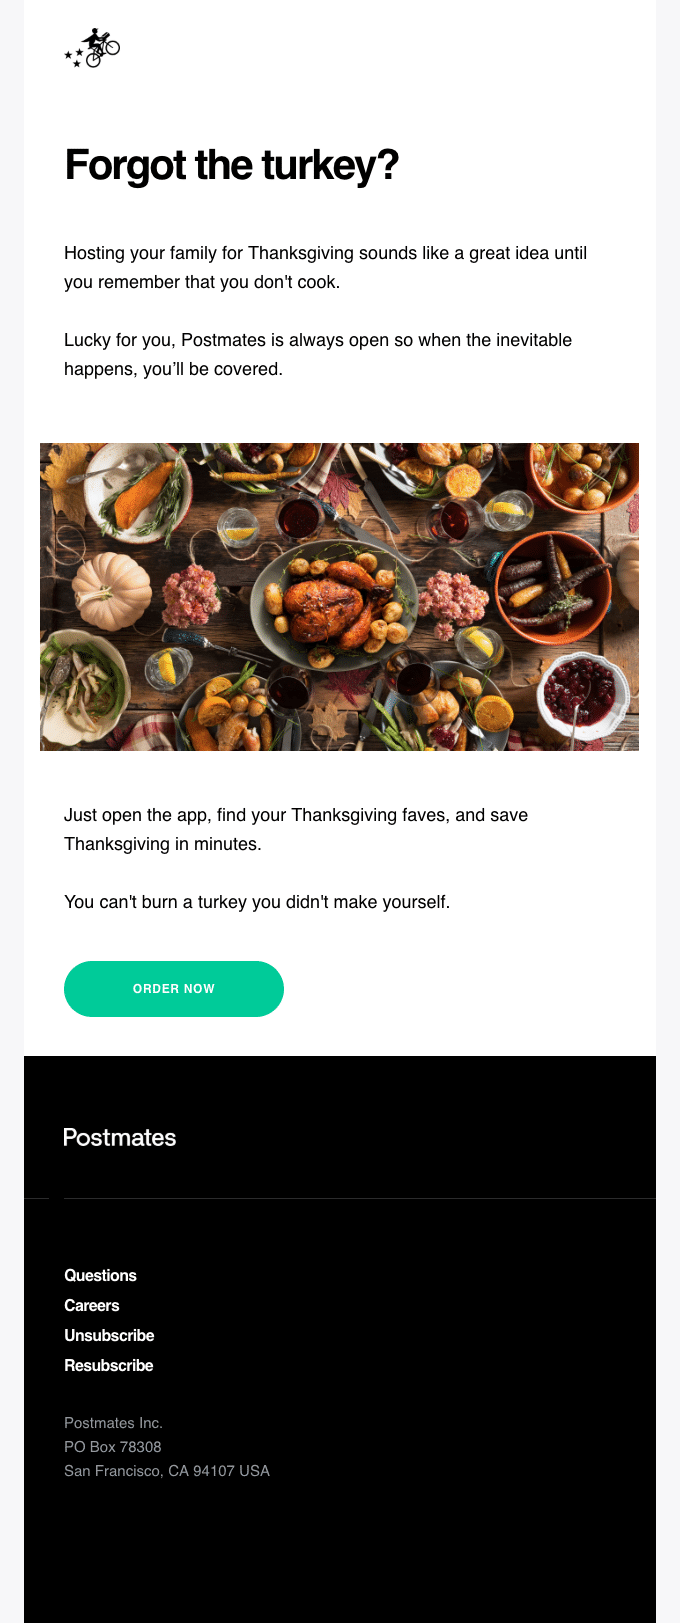 Thanksgiving email from Postmates encouraging customers to order Thanksgiving dinner to be delivered